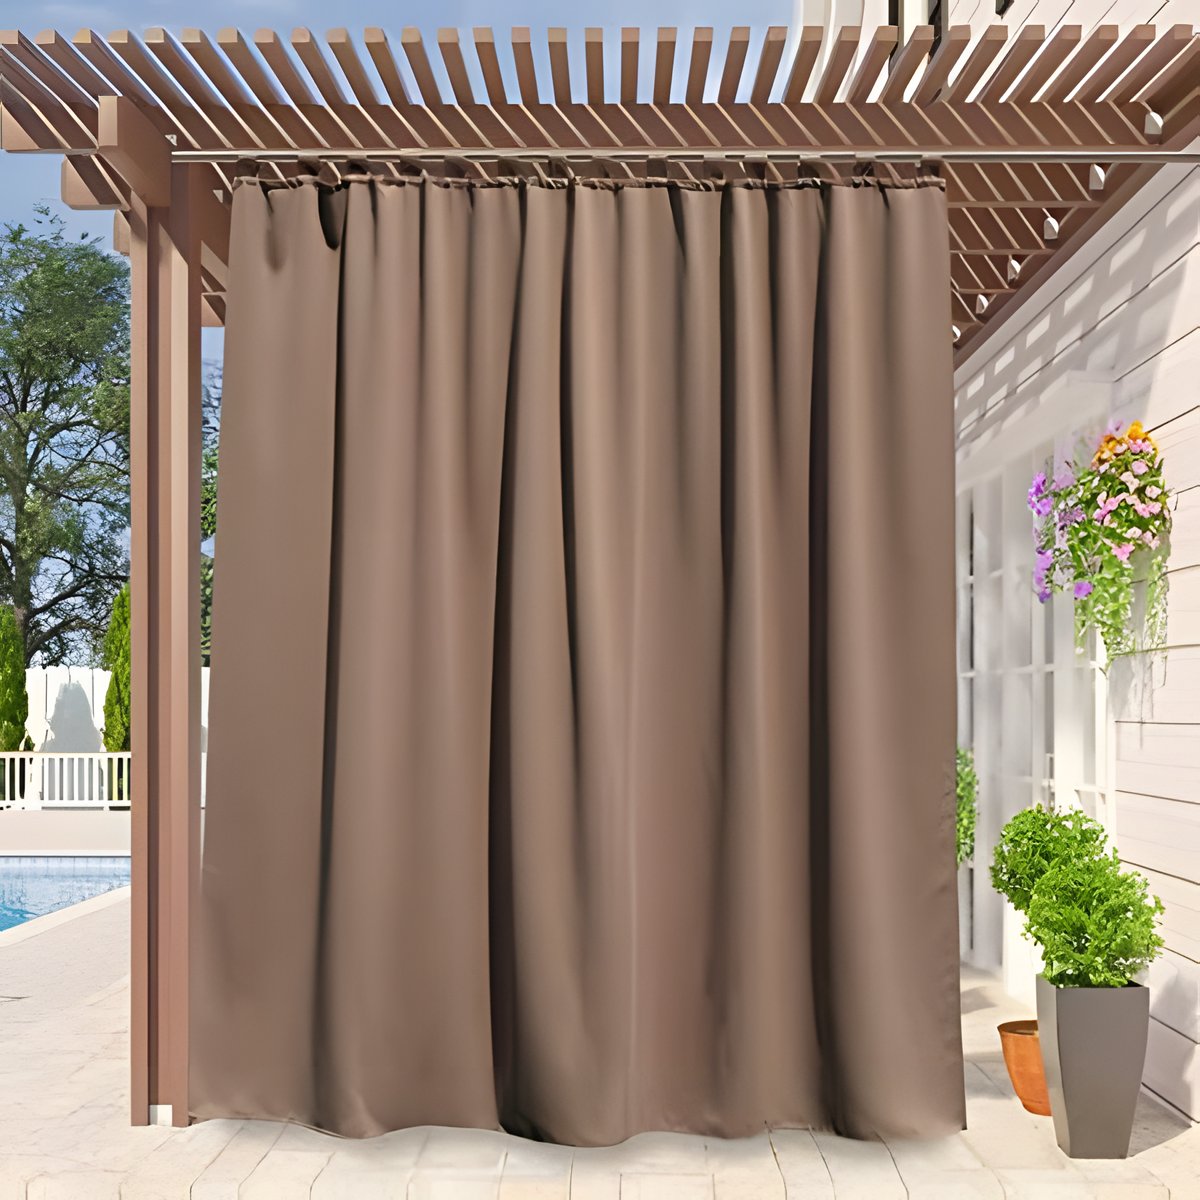 Waterproof Curtains & Blinds